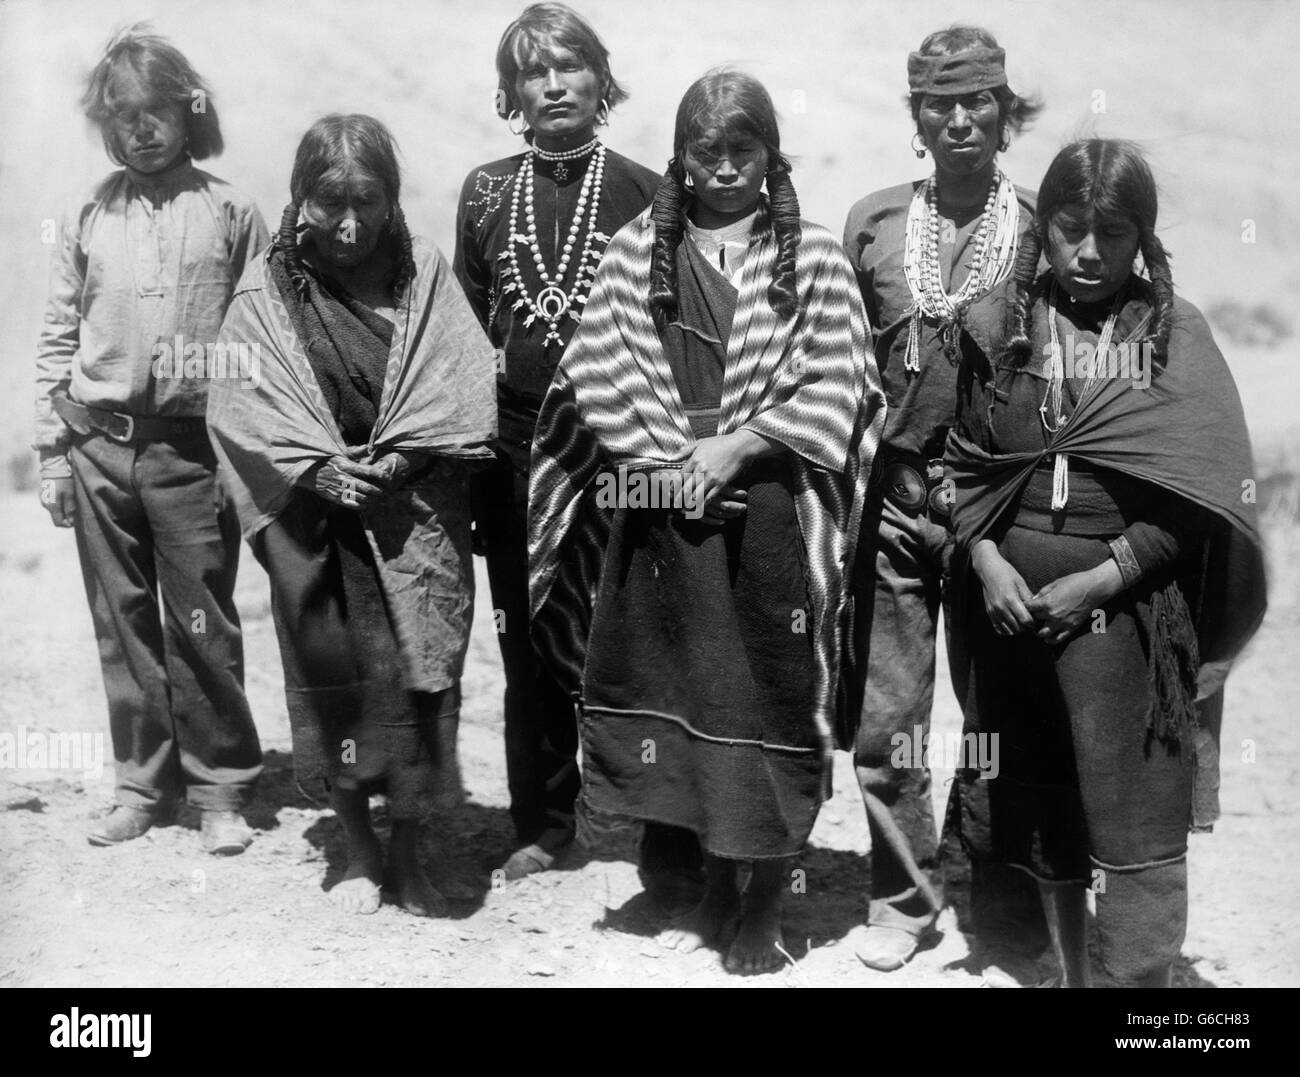 1890s GROUP PORTRAIT NATIVE AMERICAN HOPI INDIANS MEN WOMEN LOOKING AT CAMERA Stock Photo